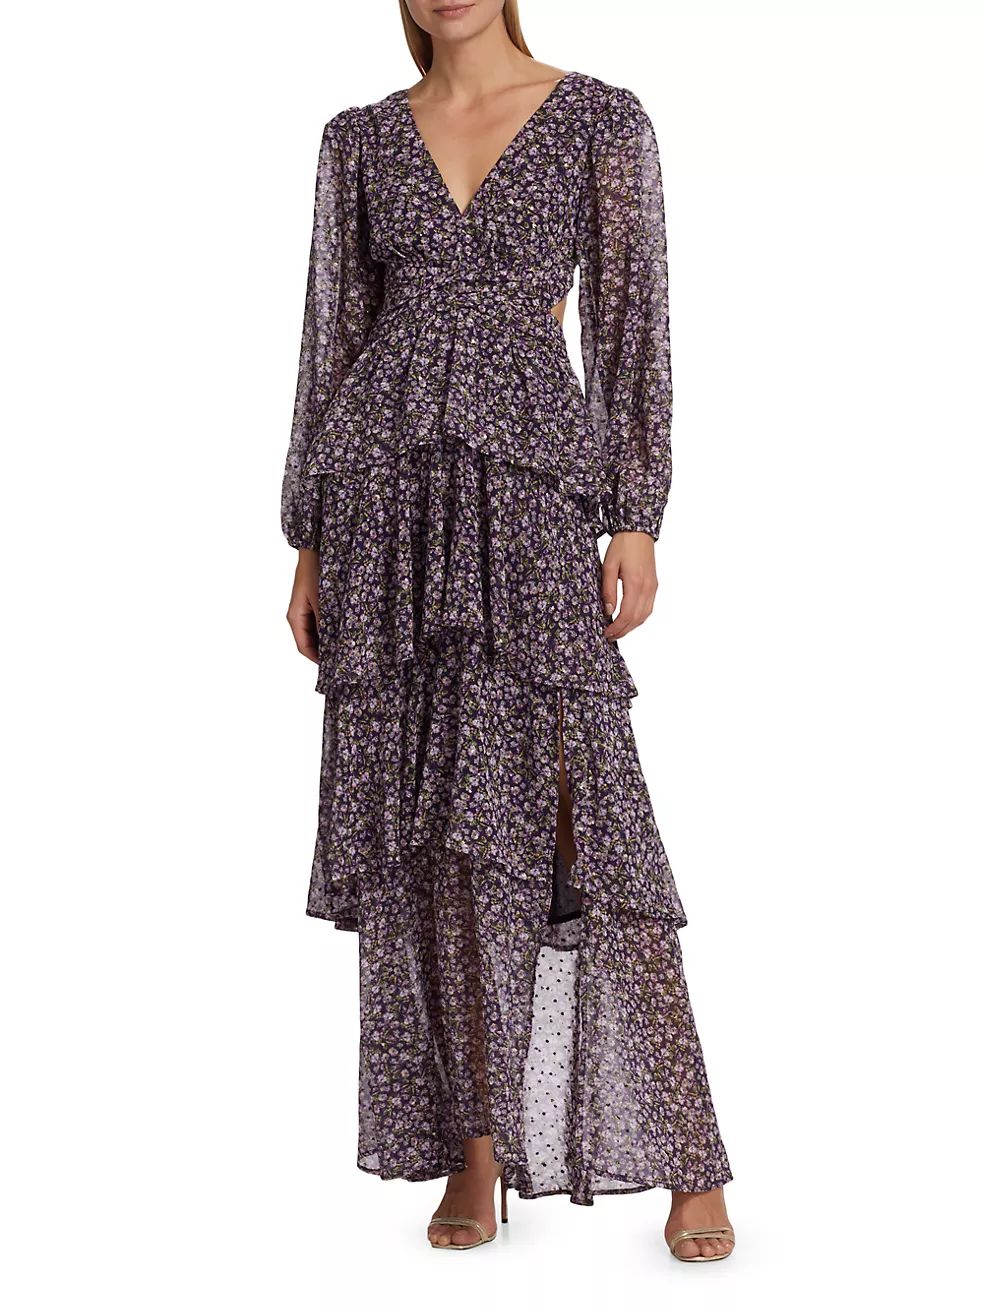 Anora Floral Ruffled Maxi Dress | Saks Fifth Avenue